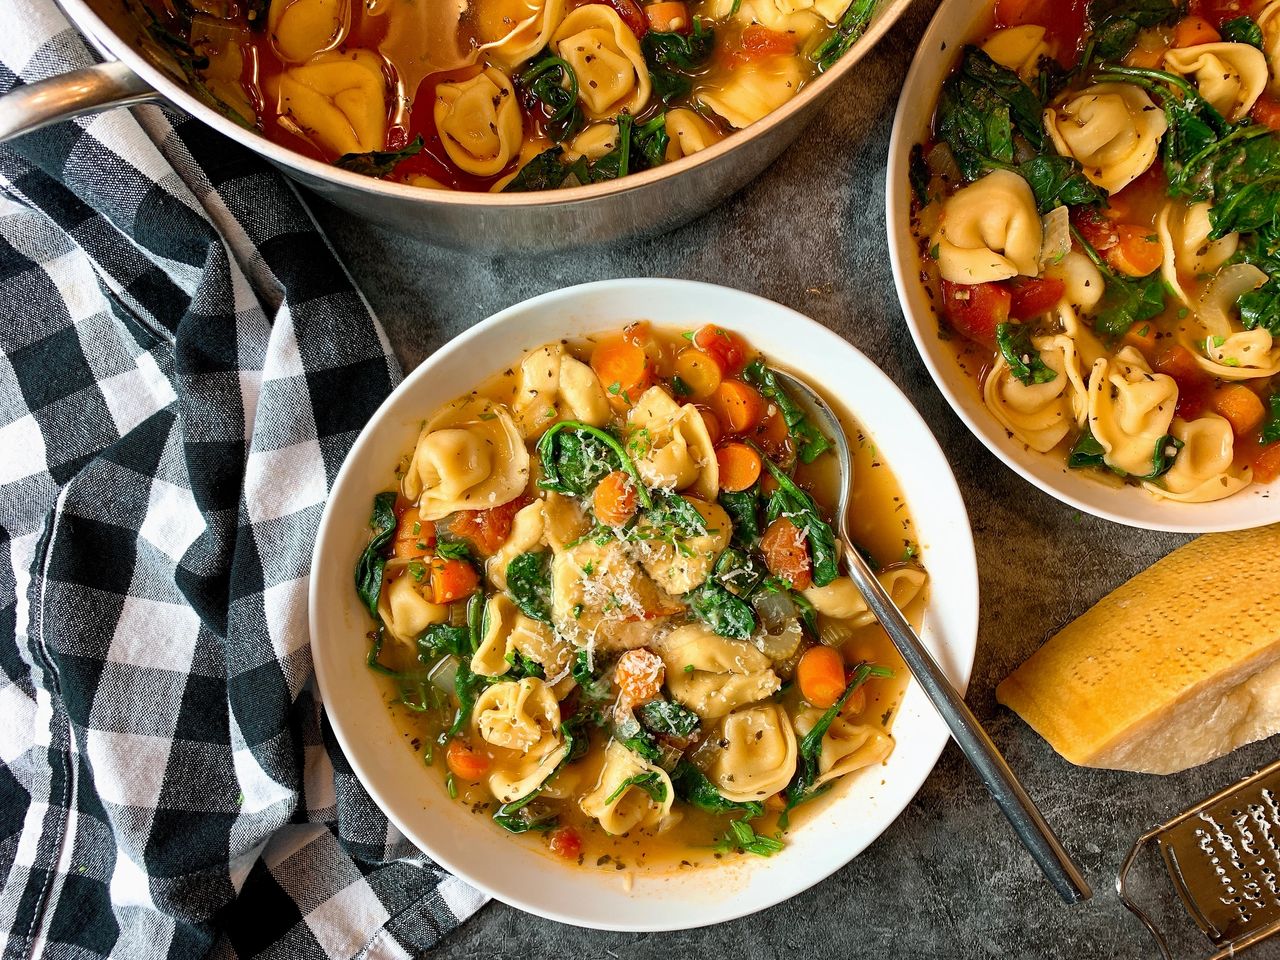 Nutty Cheese Tortellini Recipe: How to Make It